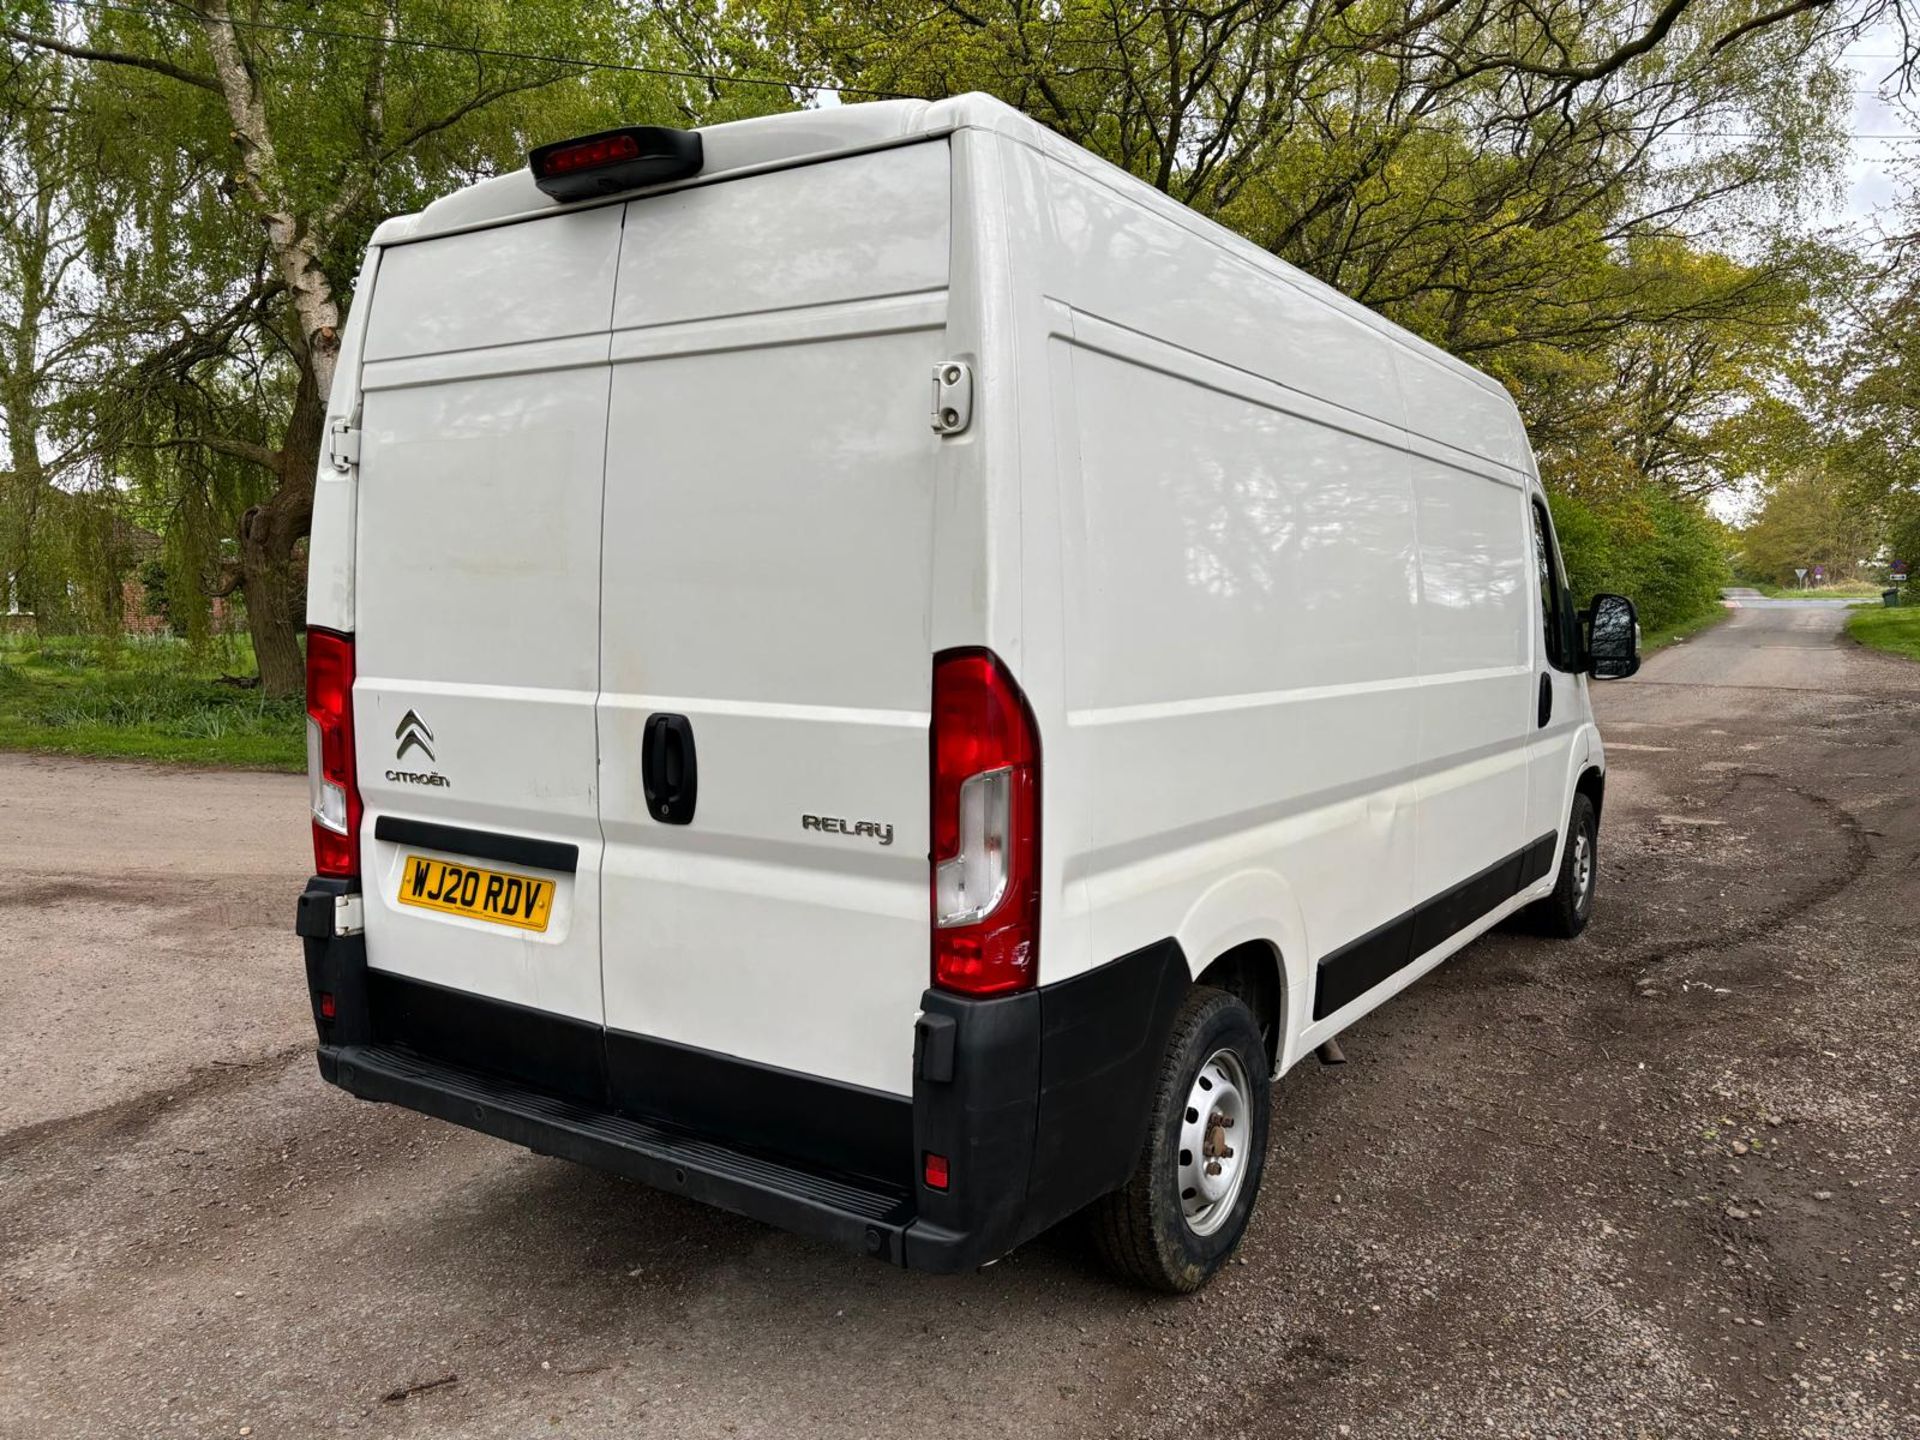 2020 20 CITROEN RELAY PANEL VAN - 2.2 6 SPEED - 109K MILES - AIR CON - EURO 6 - PLY LINED  - Image 7 of 12